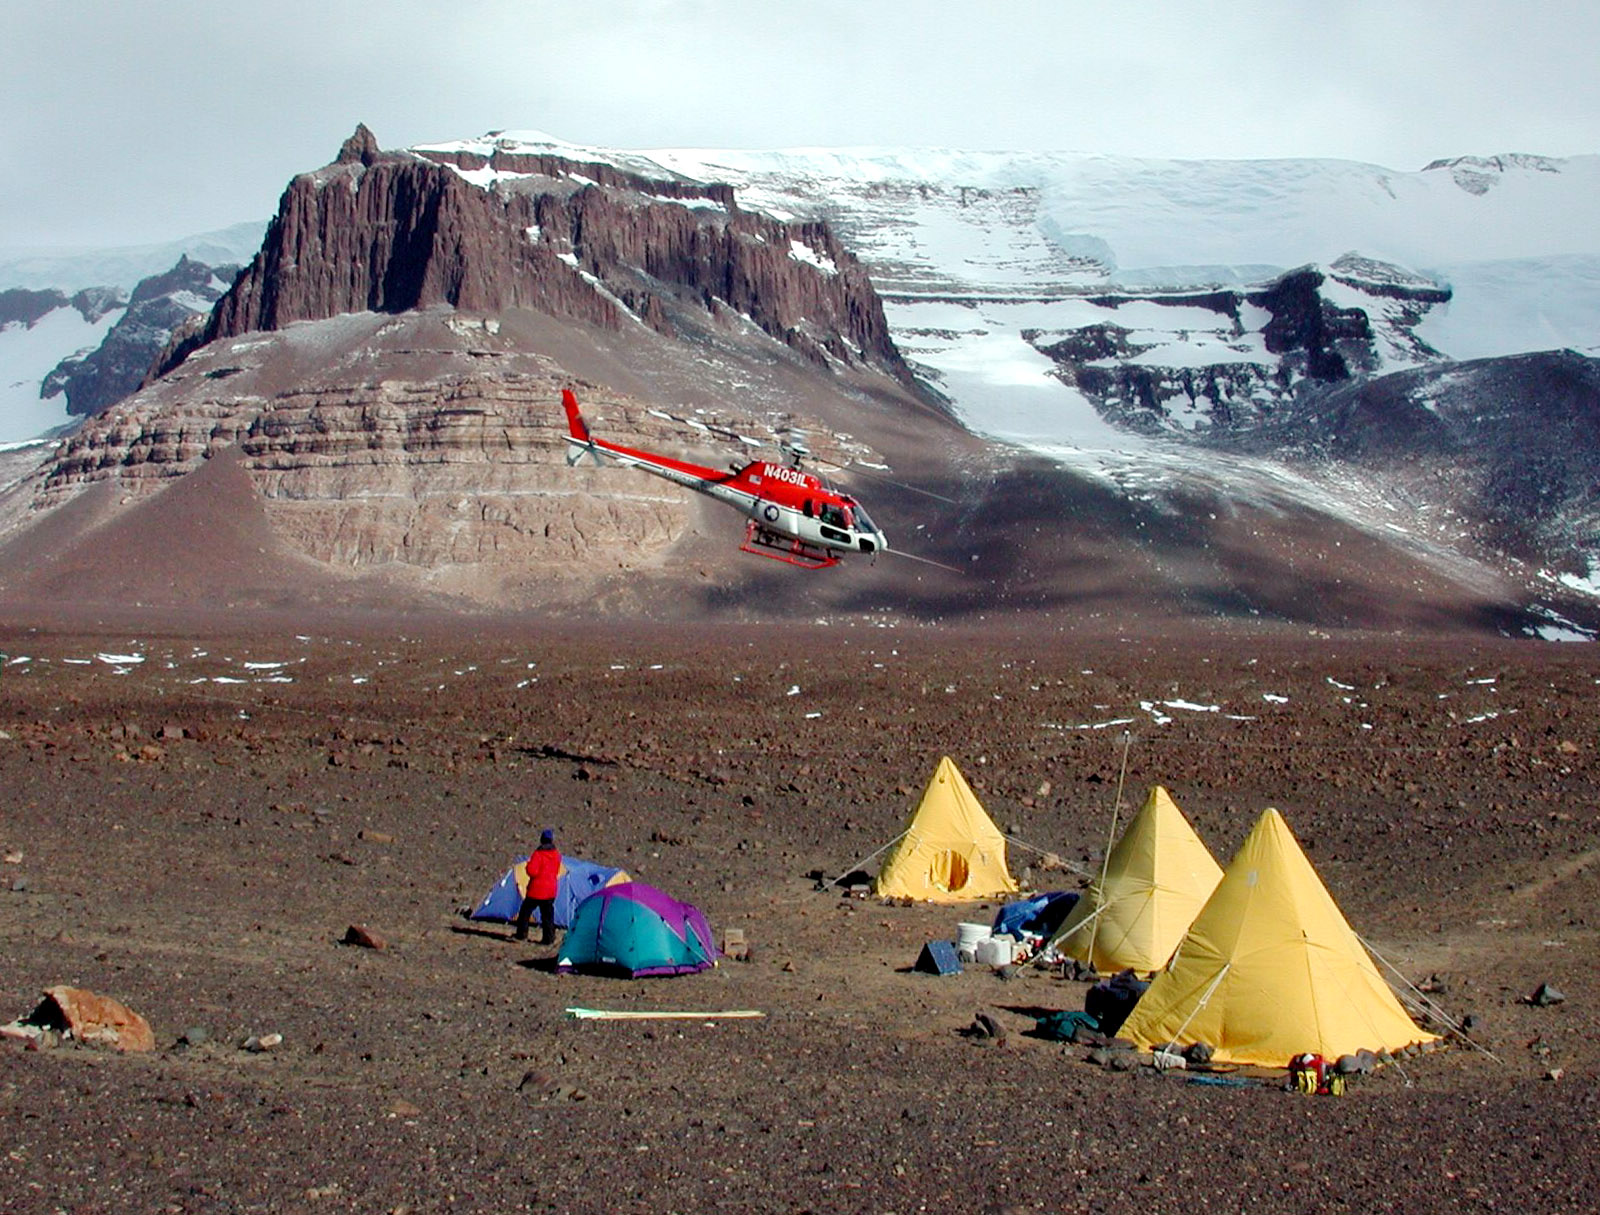 Helicopter approaches several tents on a rocky landscape.